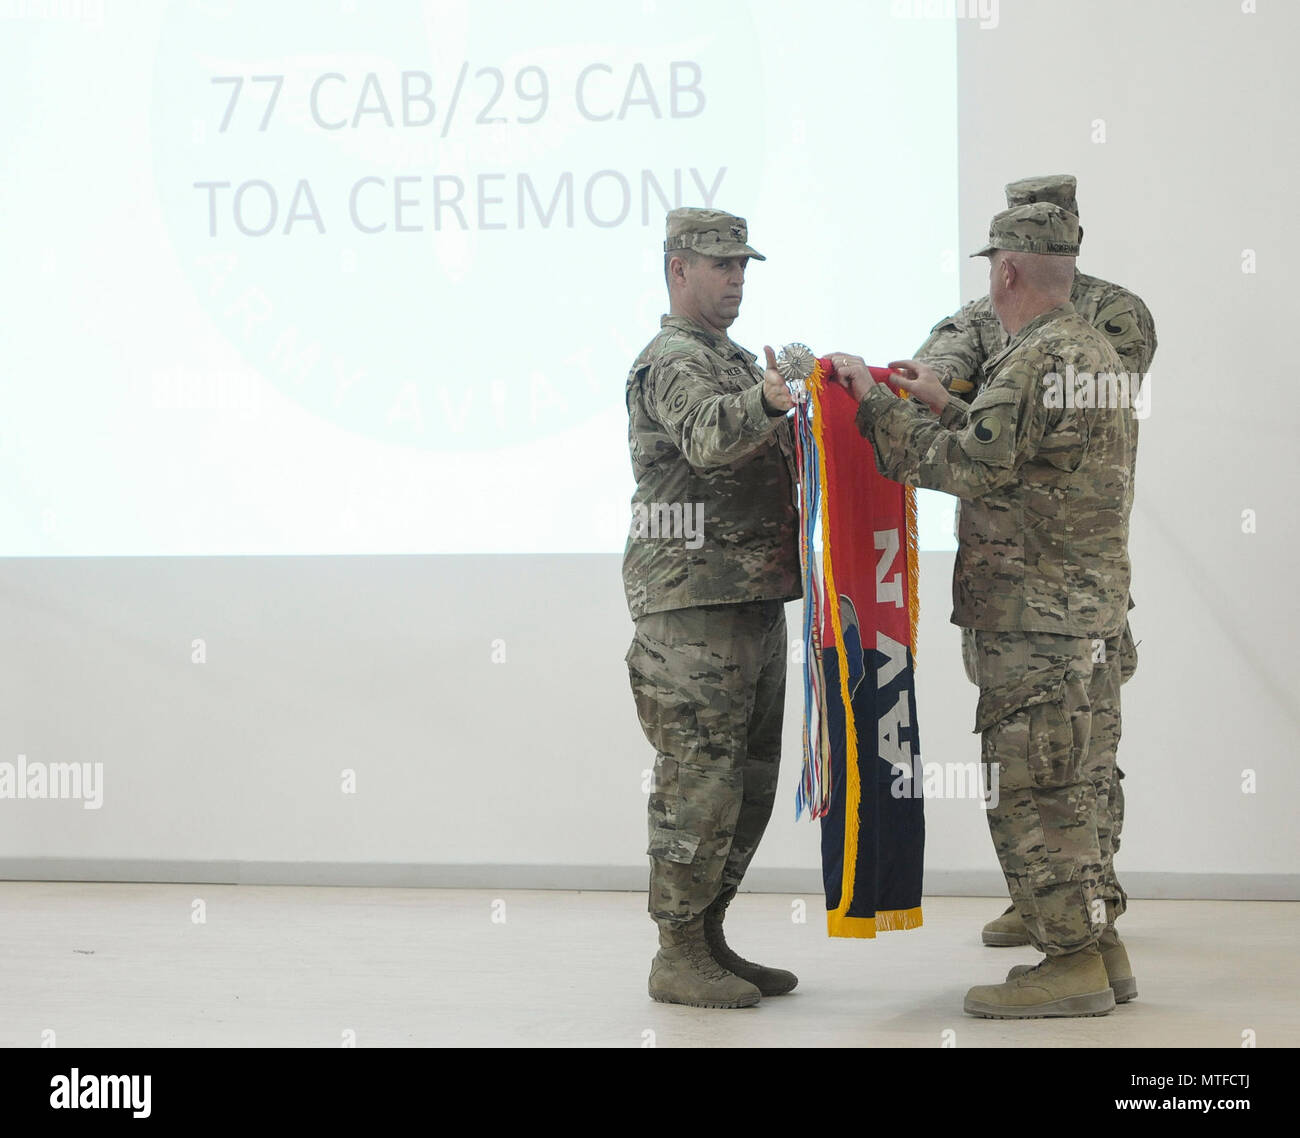 Col. Mark Beckler and Command Sgt. Major Steven McKenna unveiled the 29th Combat Aviation Brigade Colors during their Transfer of Authority Ceremony on April 23. The TOA signals the transference of responsibility for theater aviation operations from the outgoing 77th CAB. Camp Buehring, Kuwait (US. Army Stock Photo